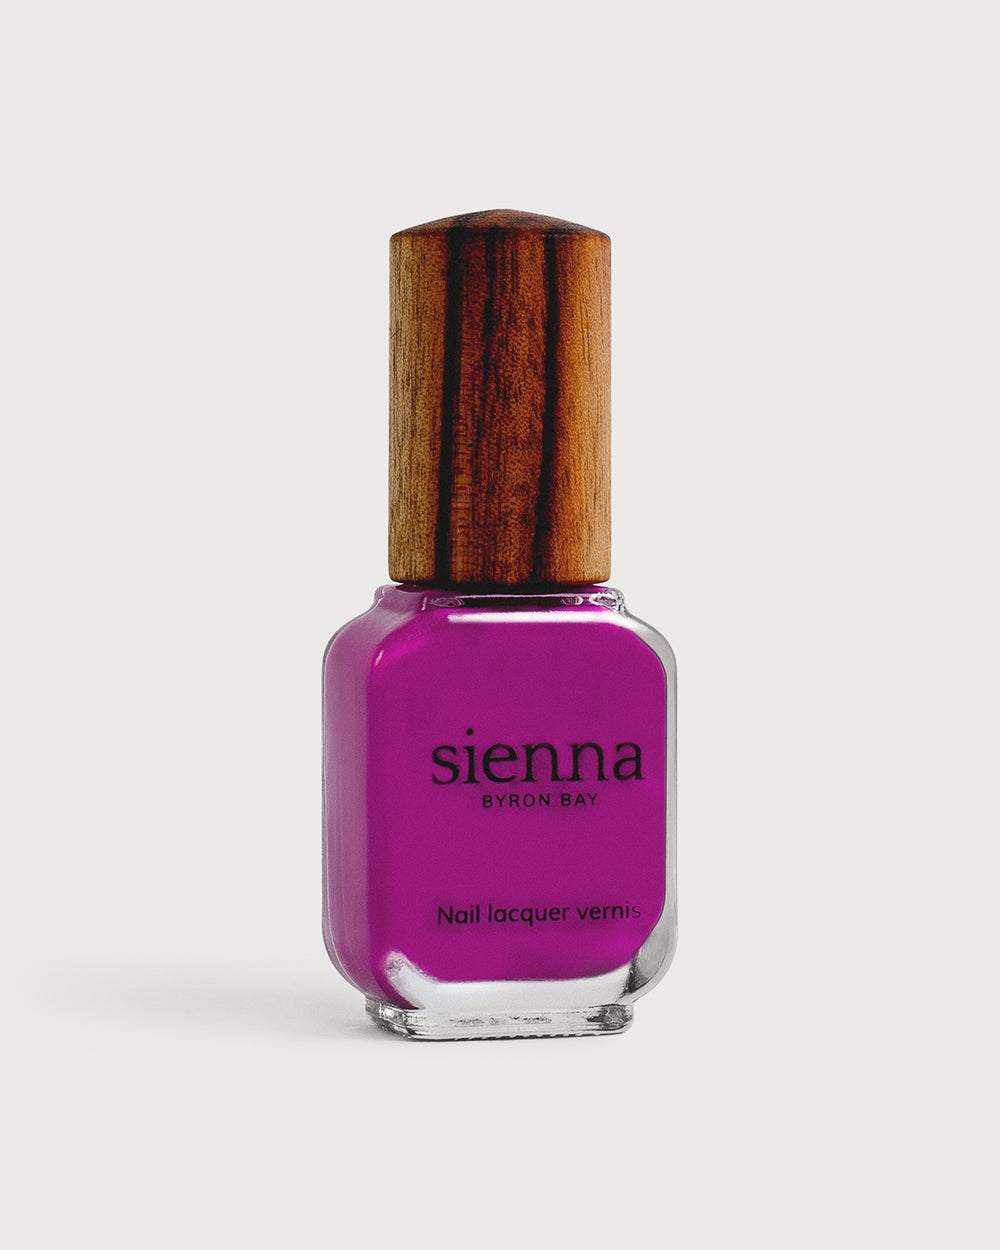 Bright magenta nail polish glass bottle with timber cap